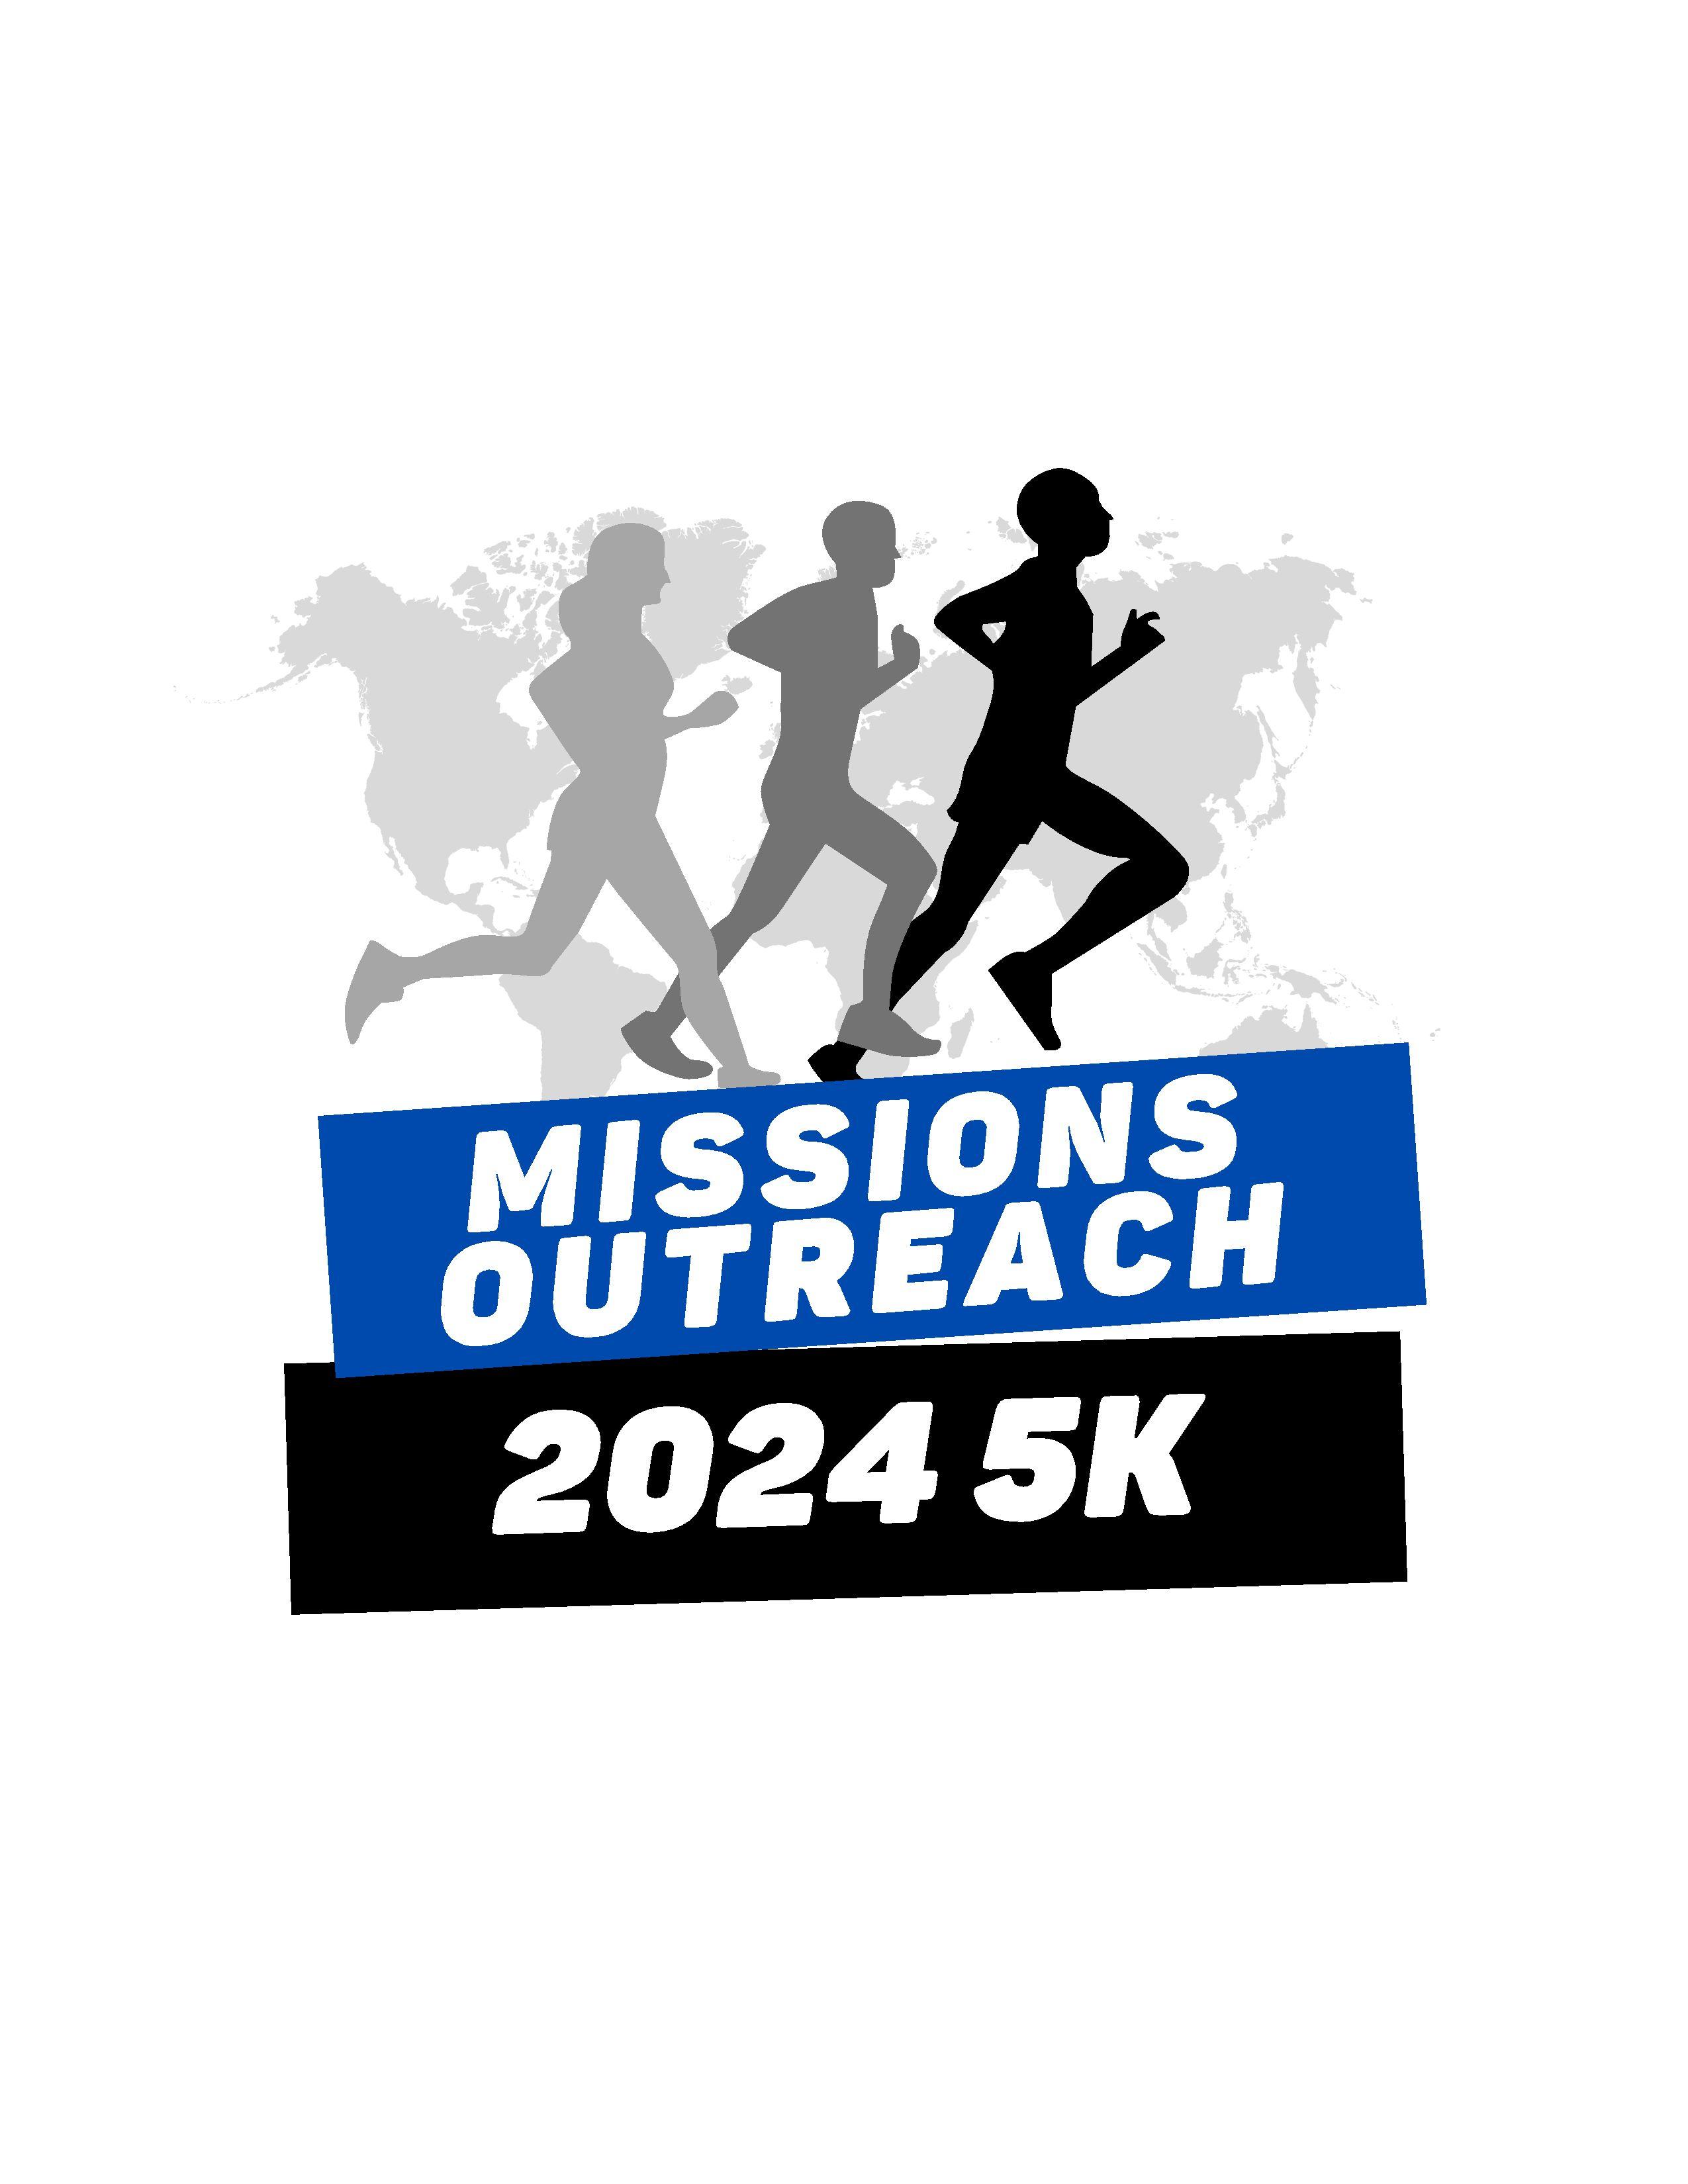 Missions Outreach 2024 5K